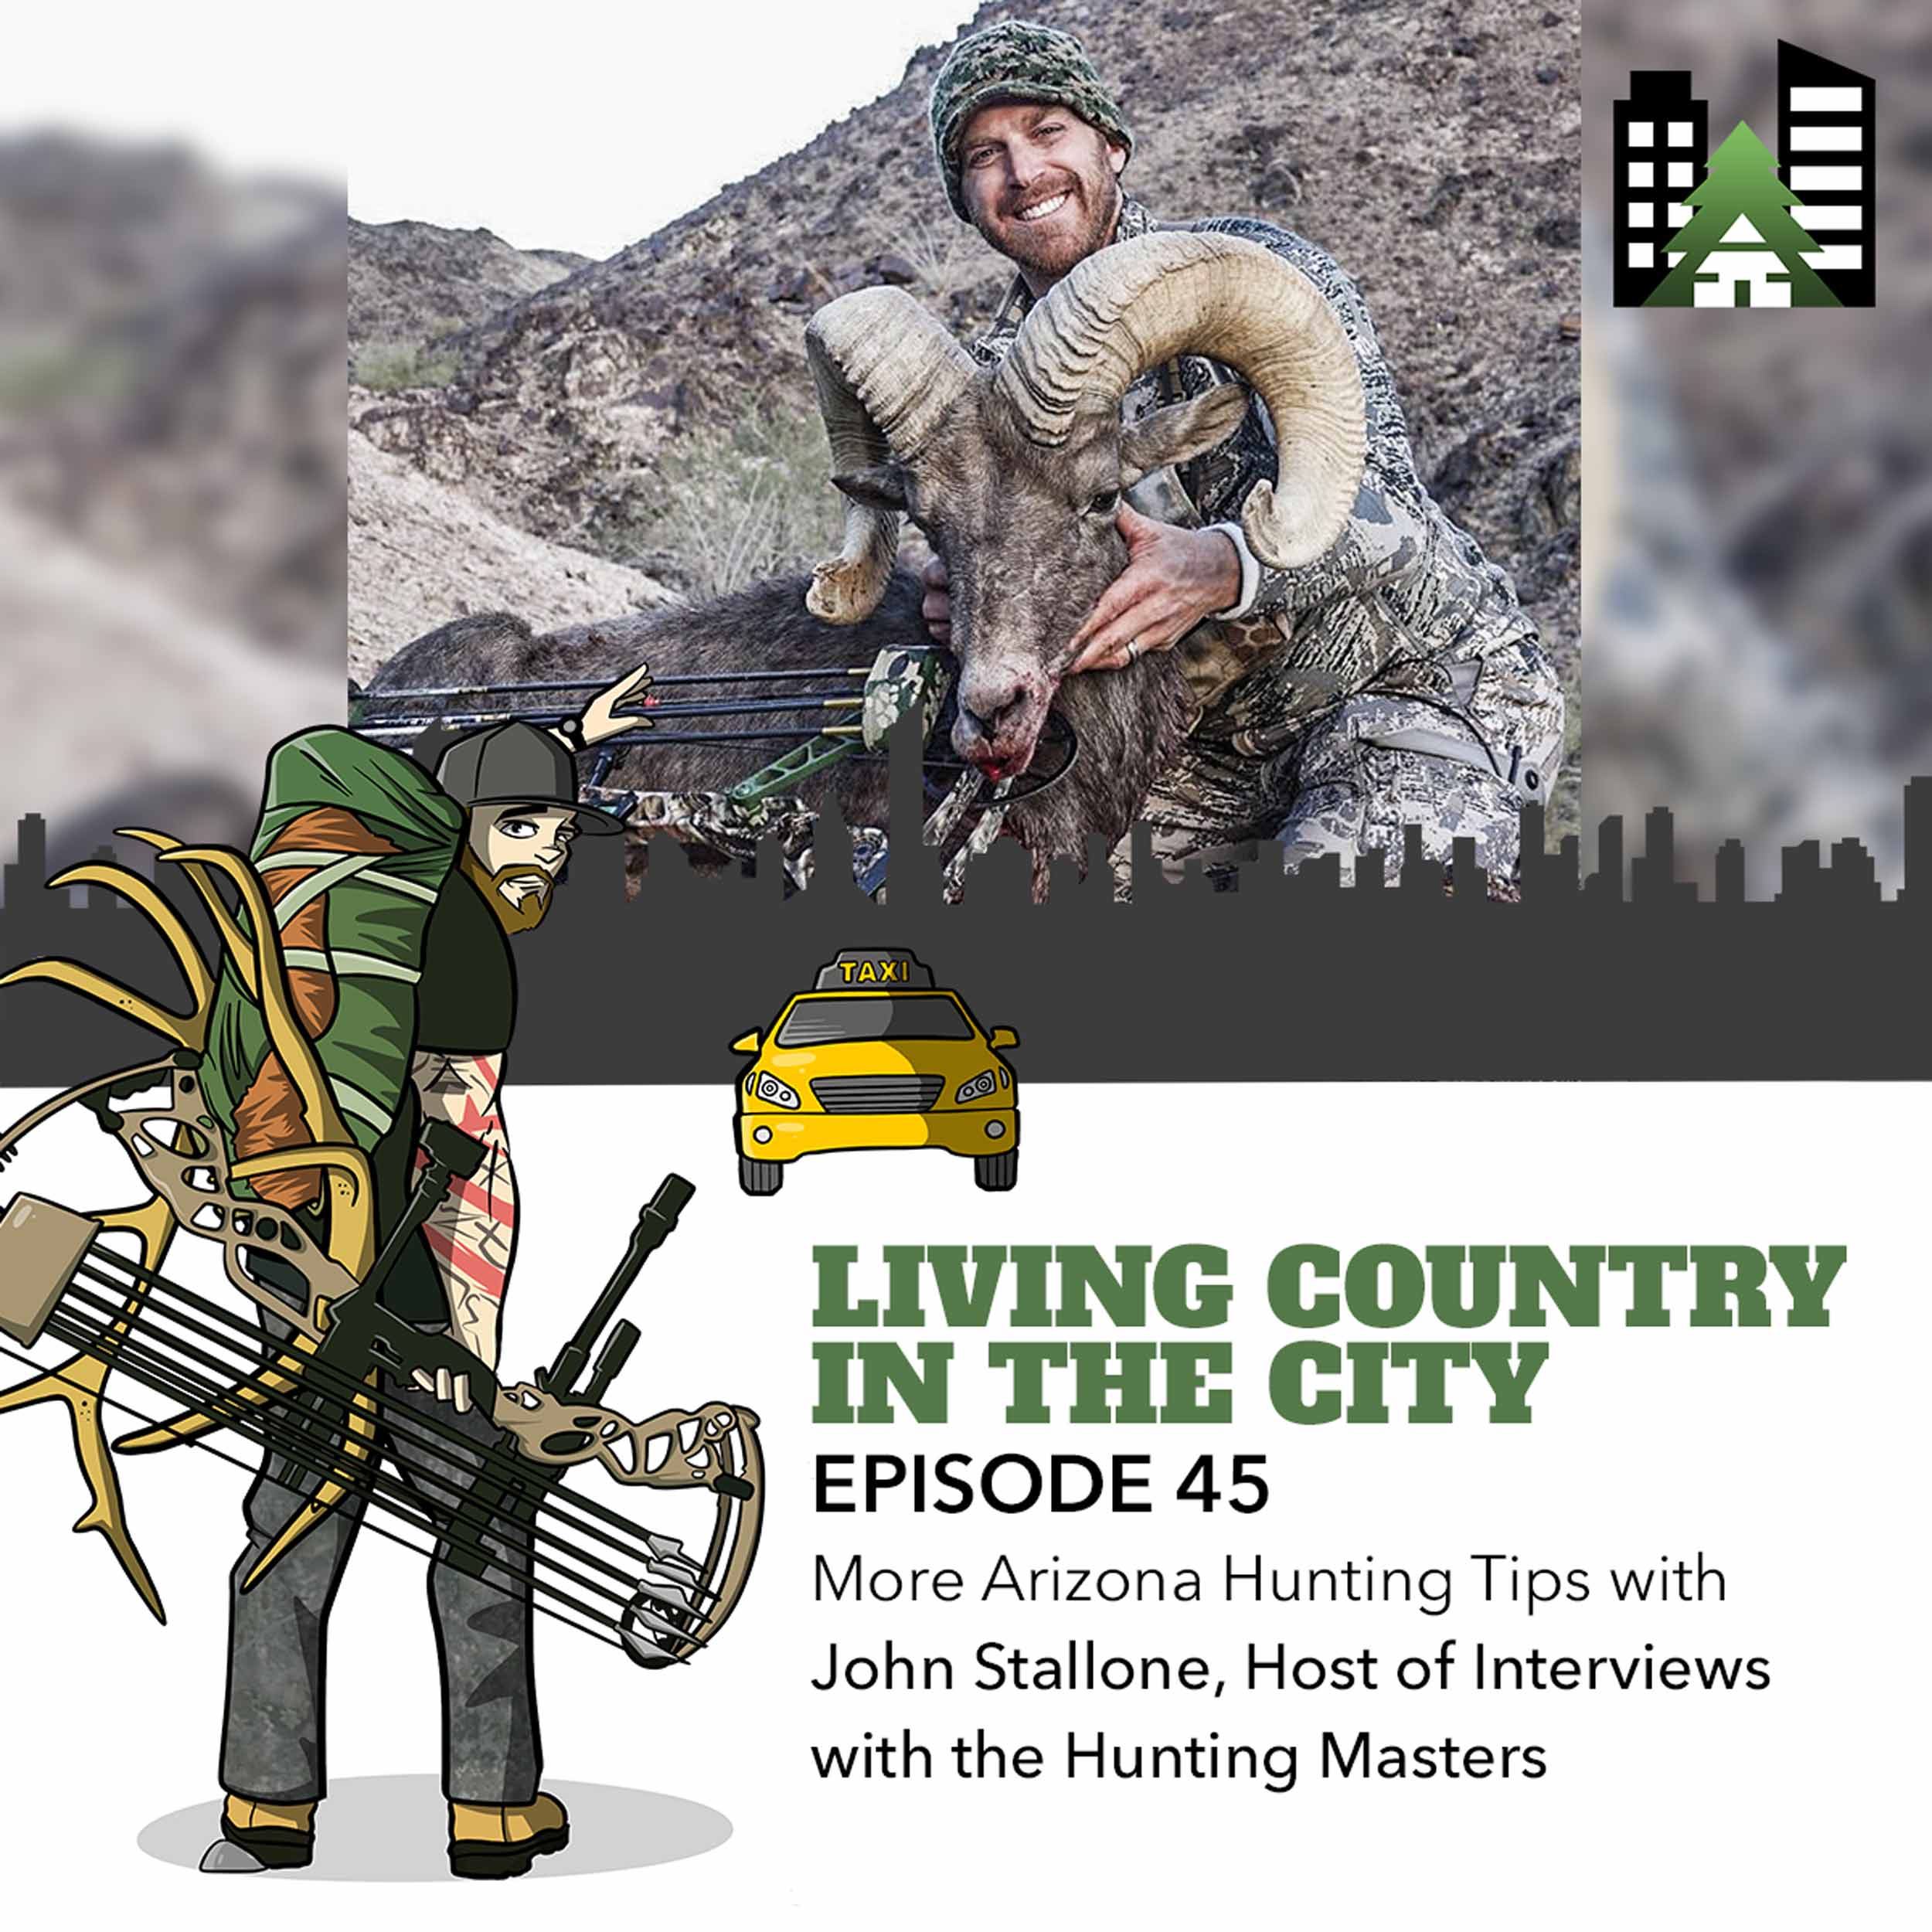 Ep 45 - More Arizona Hunting Tips with John Stallone, Host of Interviews with the Hunting Masters